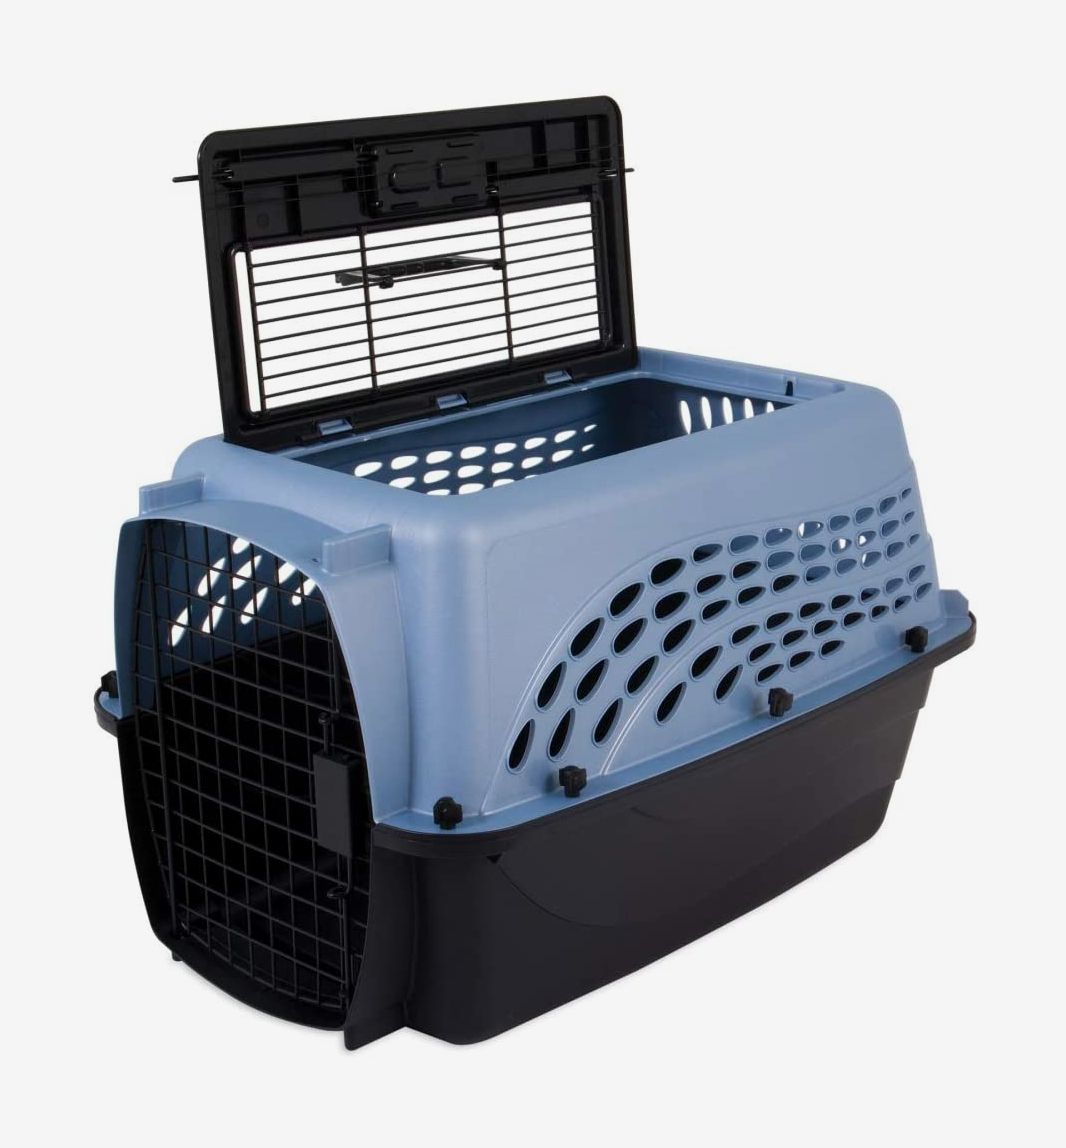 5 Best Double Cat Carriers Of 2024